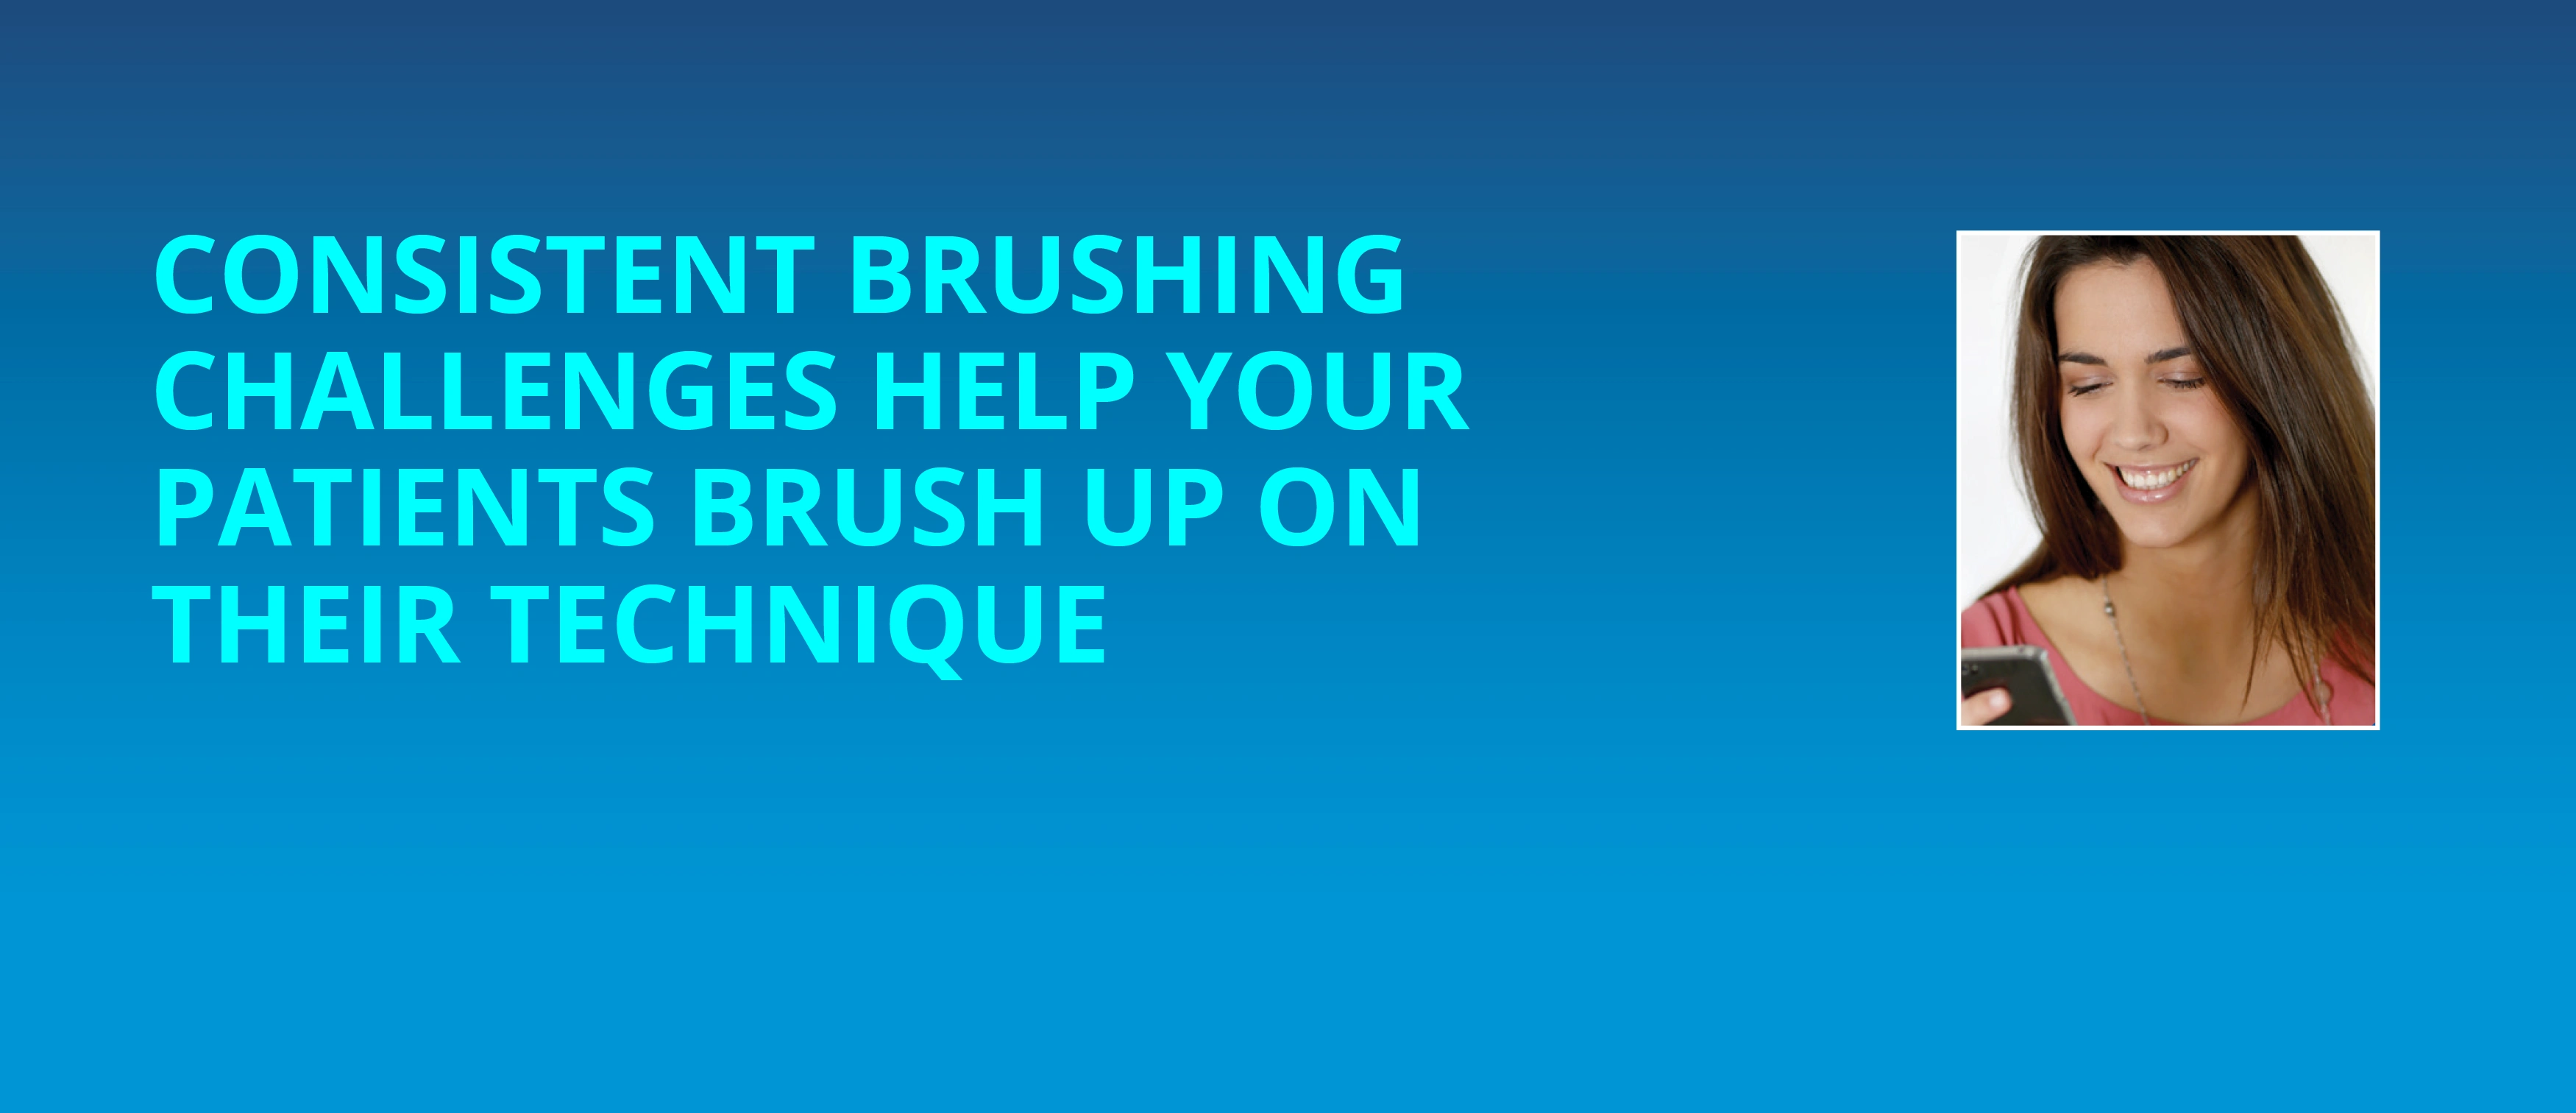 Consistent Brushing Challenges Help Your Patients Brush Up On Their Technique